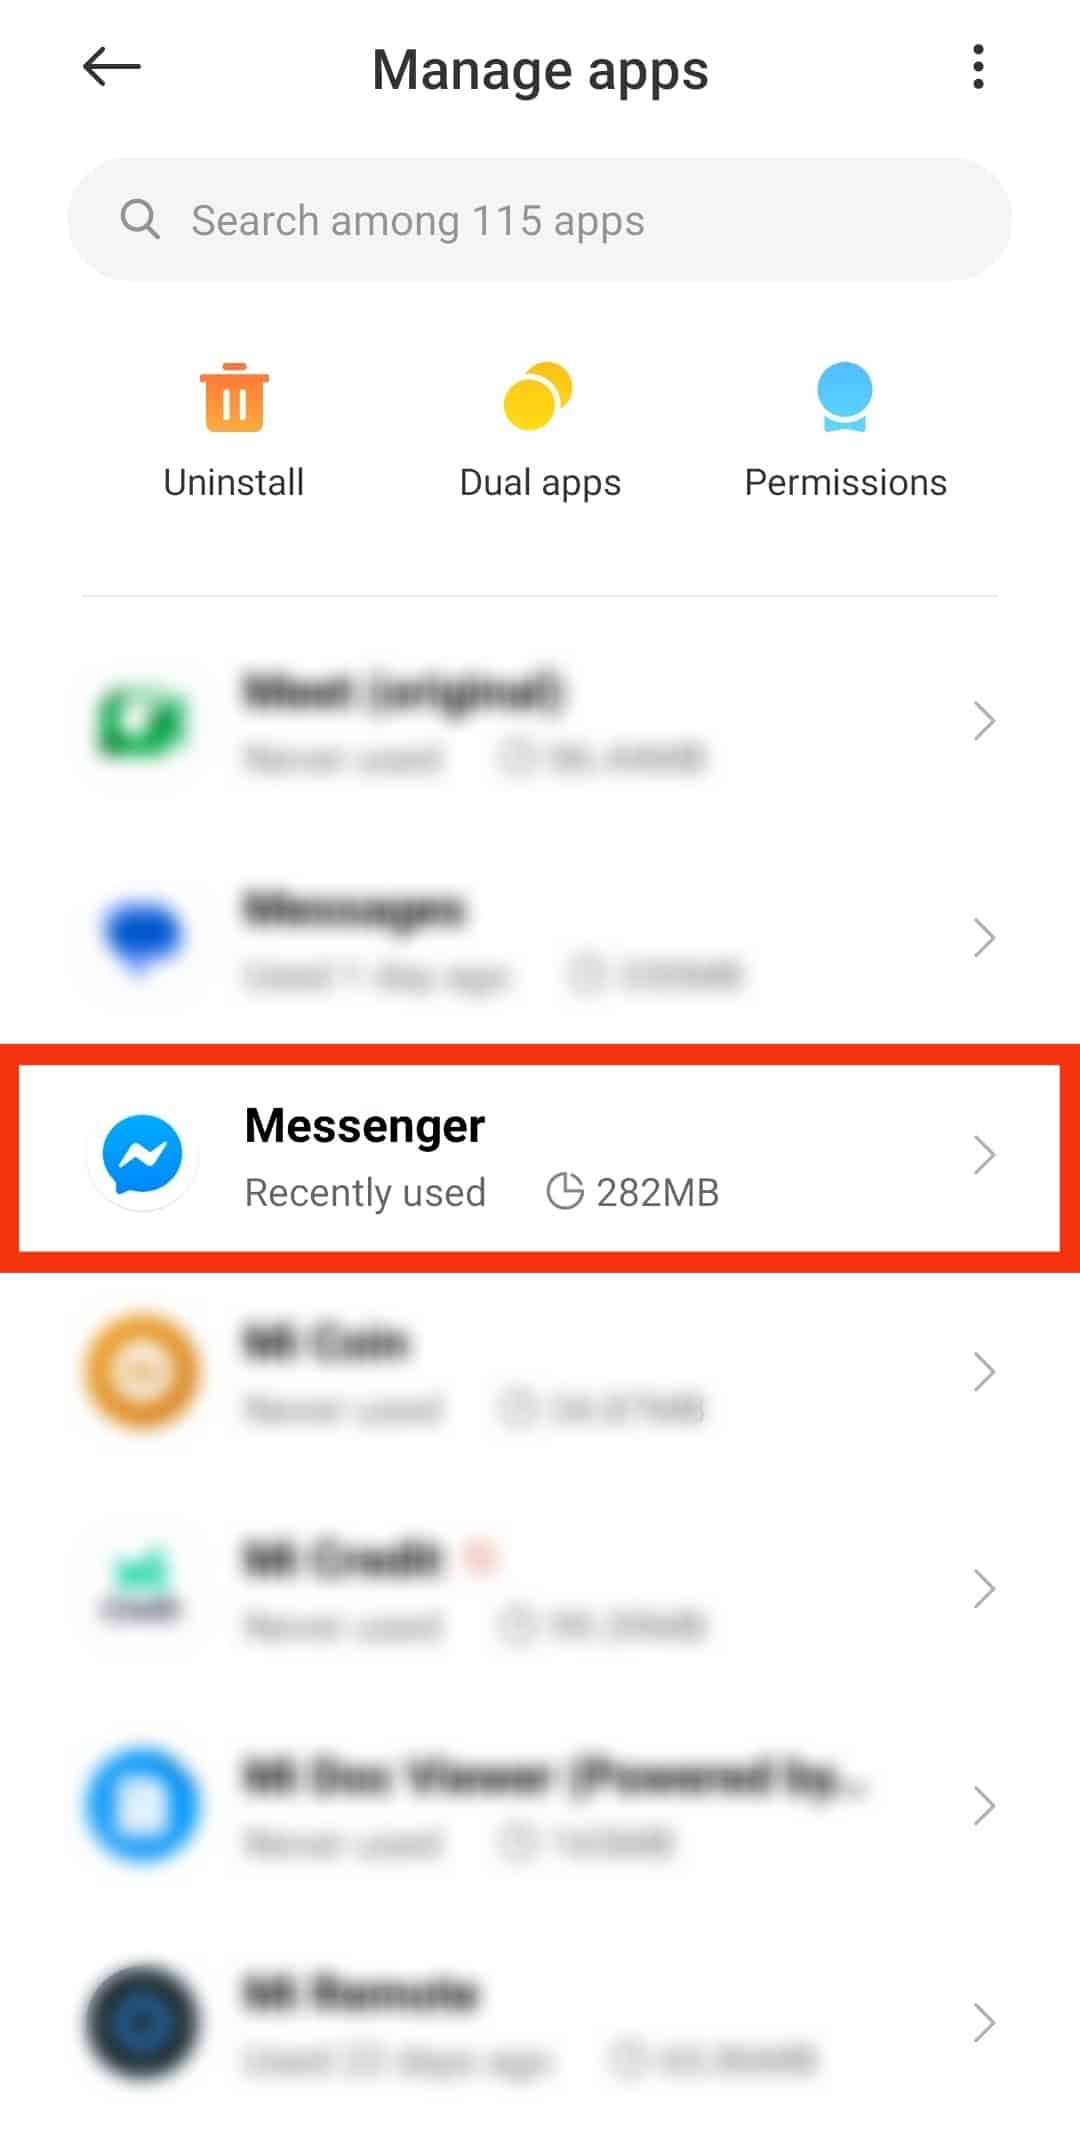 Locate Messenger And Tap On It